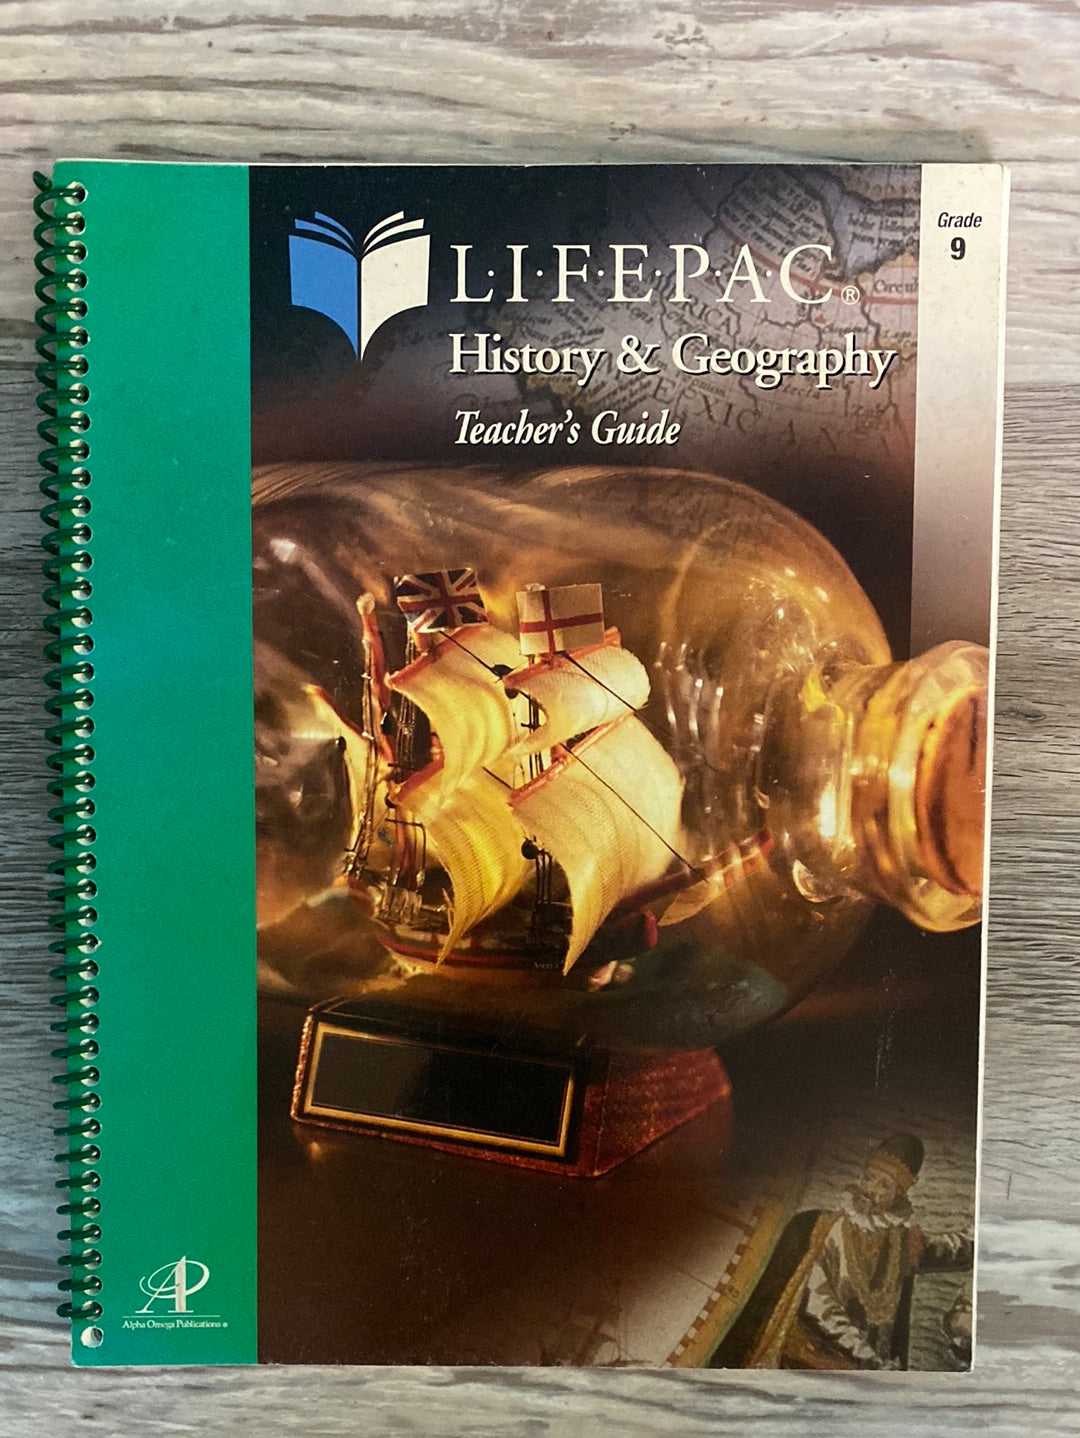 Lifepac: History & Geography Partial Set  by Alpha Omega Publications